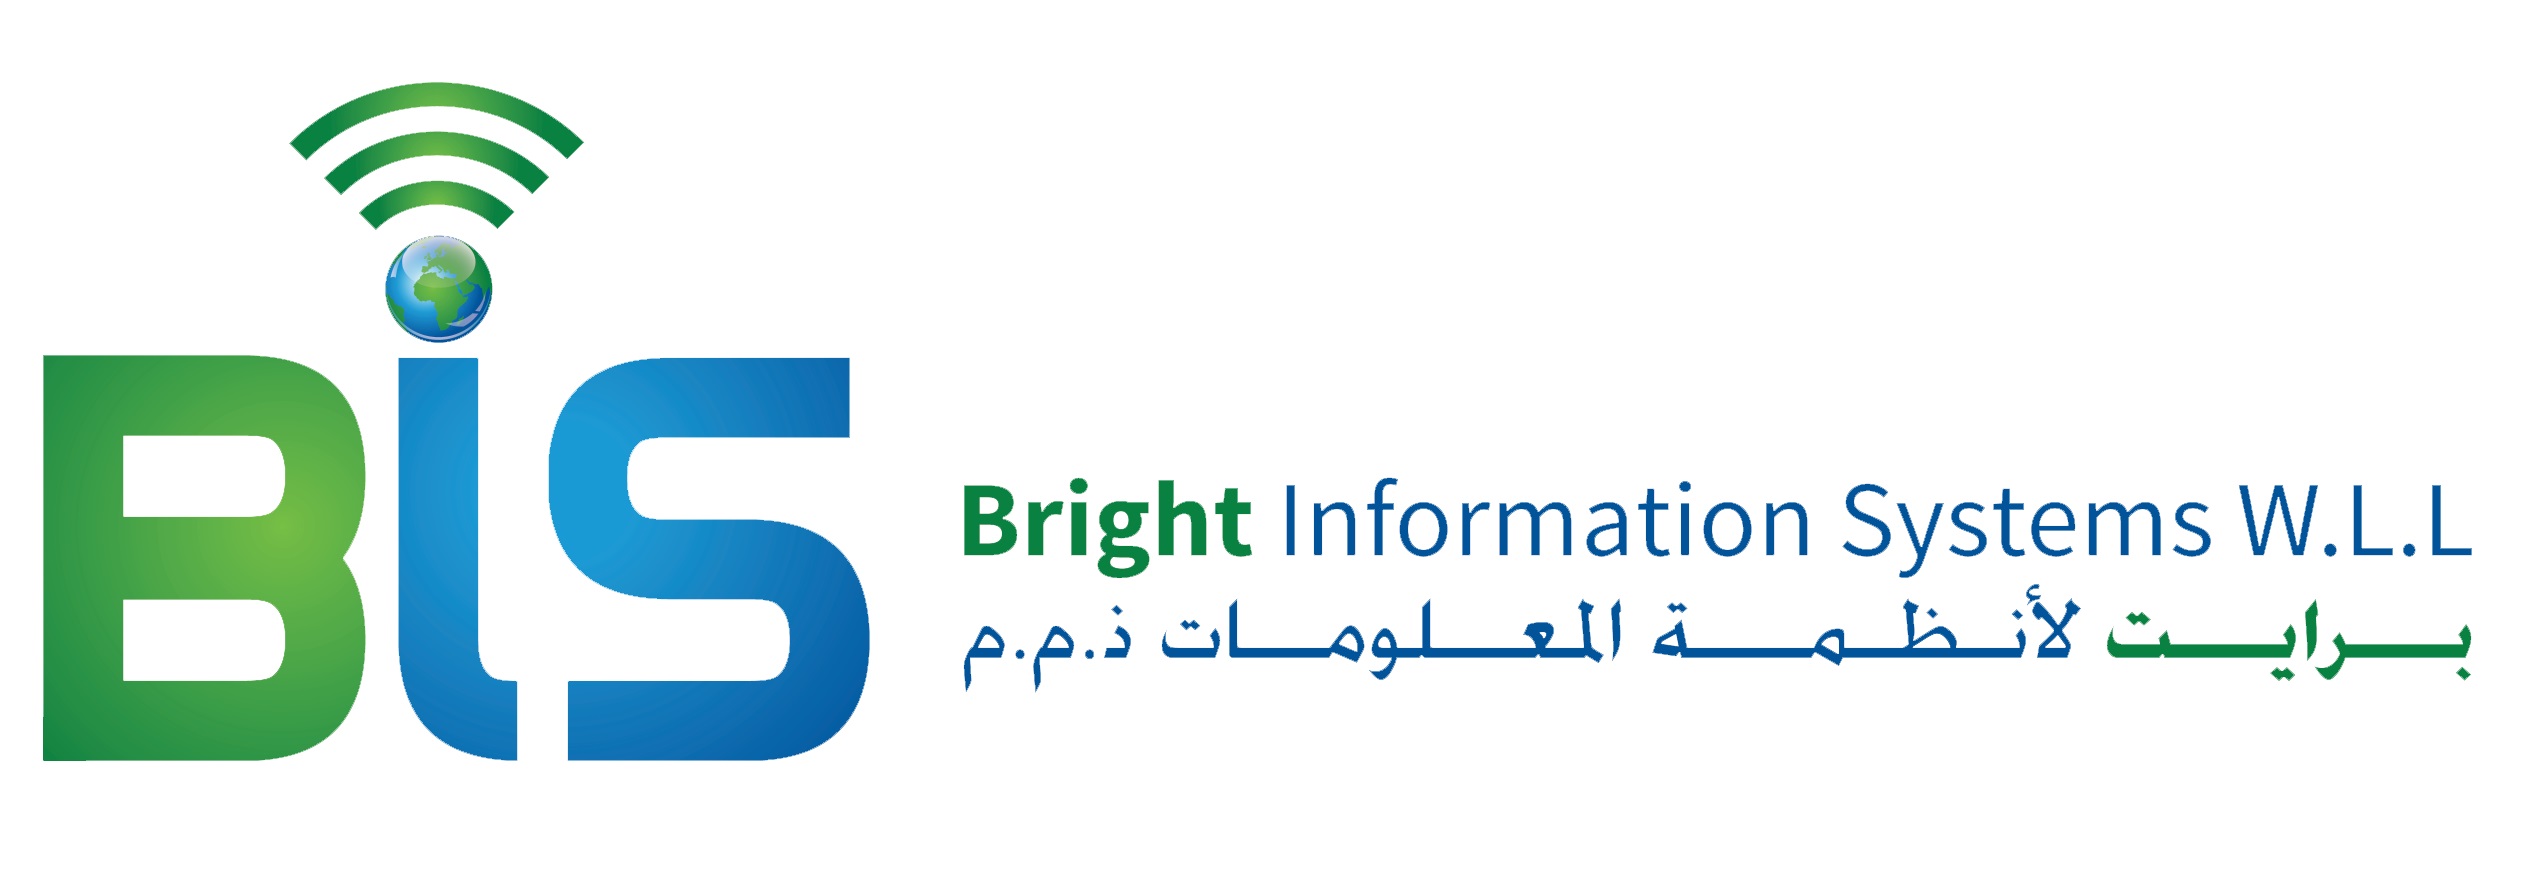 bright information systems